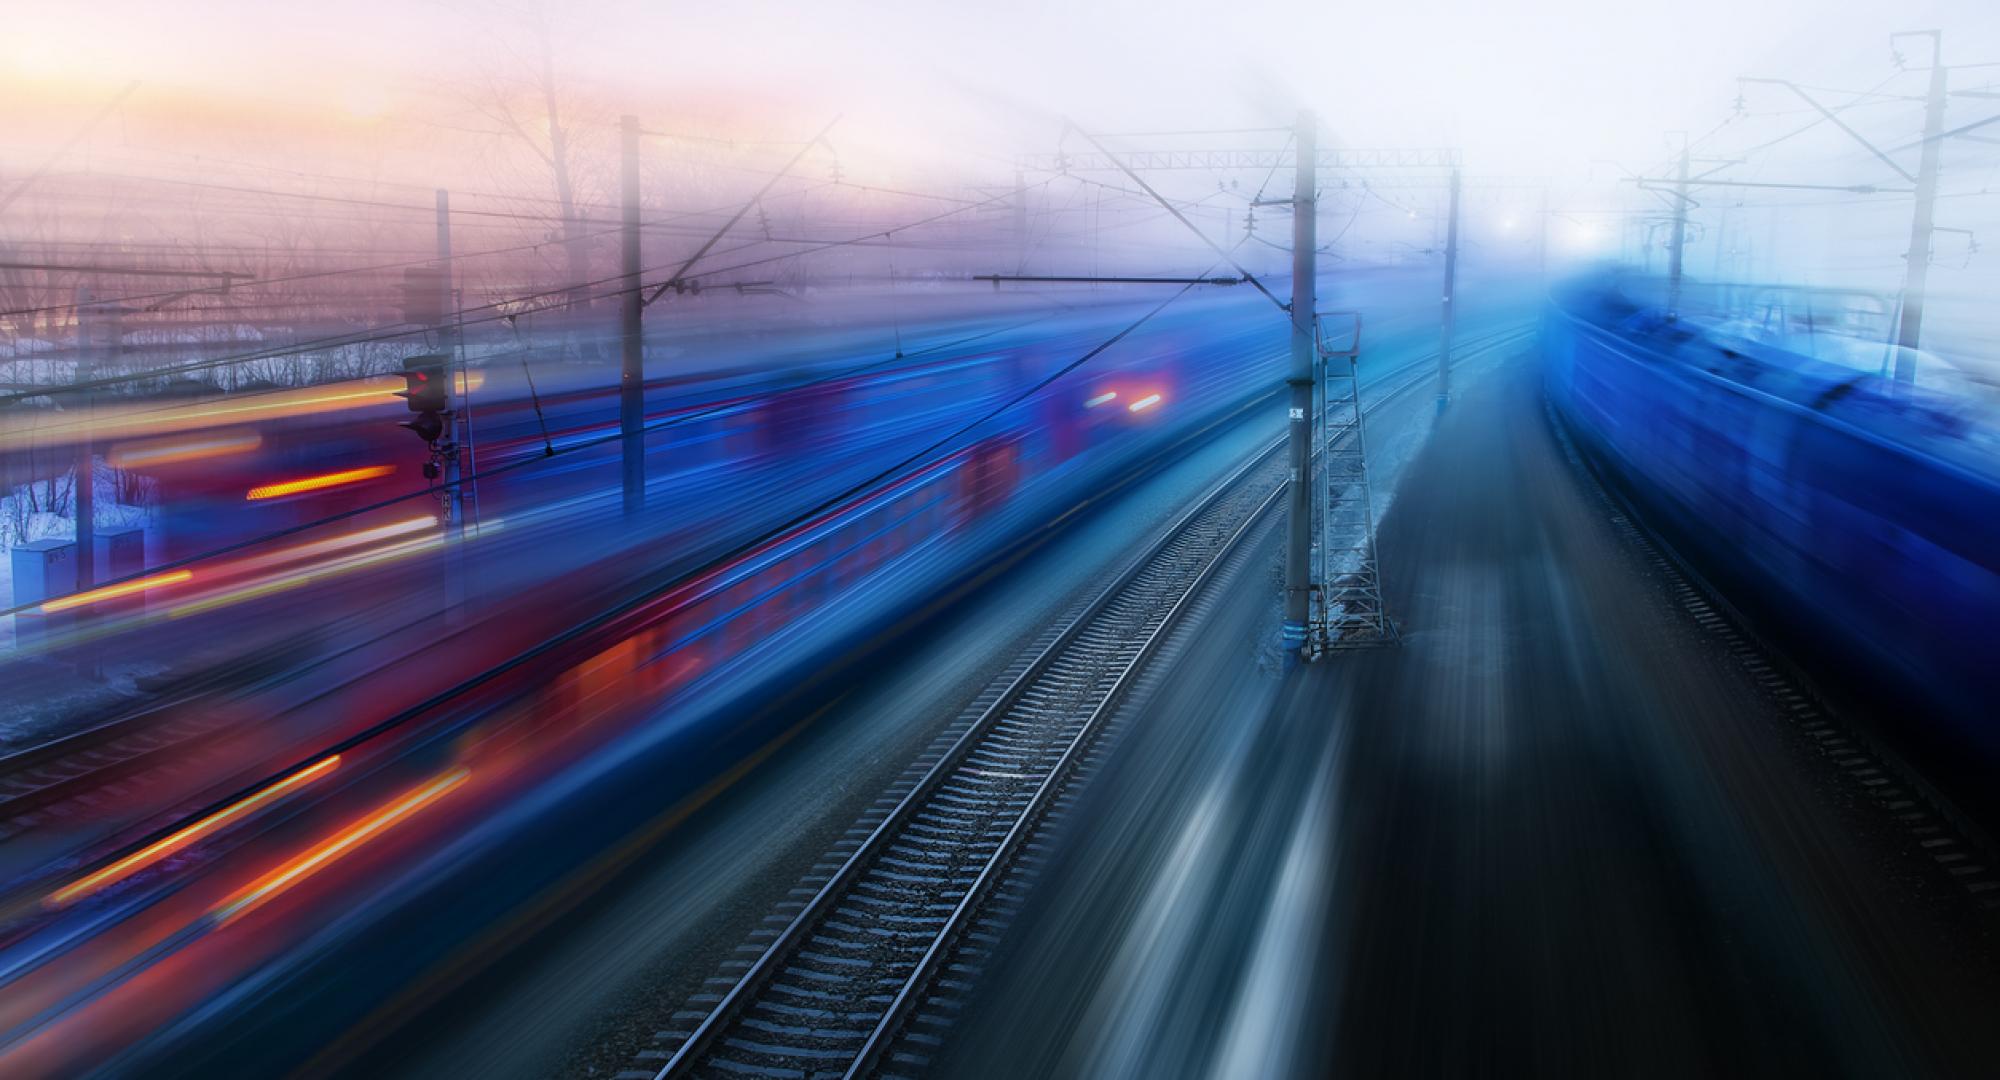 Motion blurred image of trains